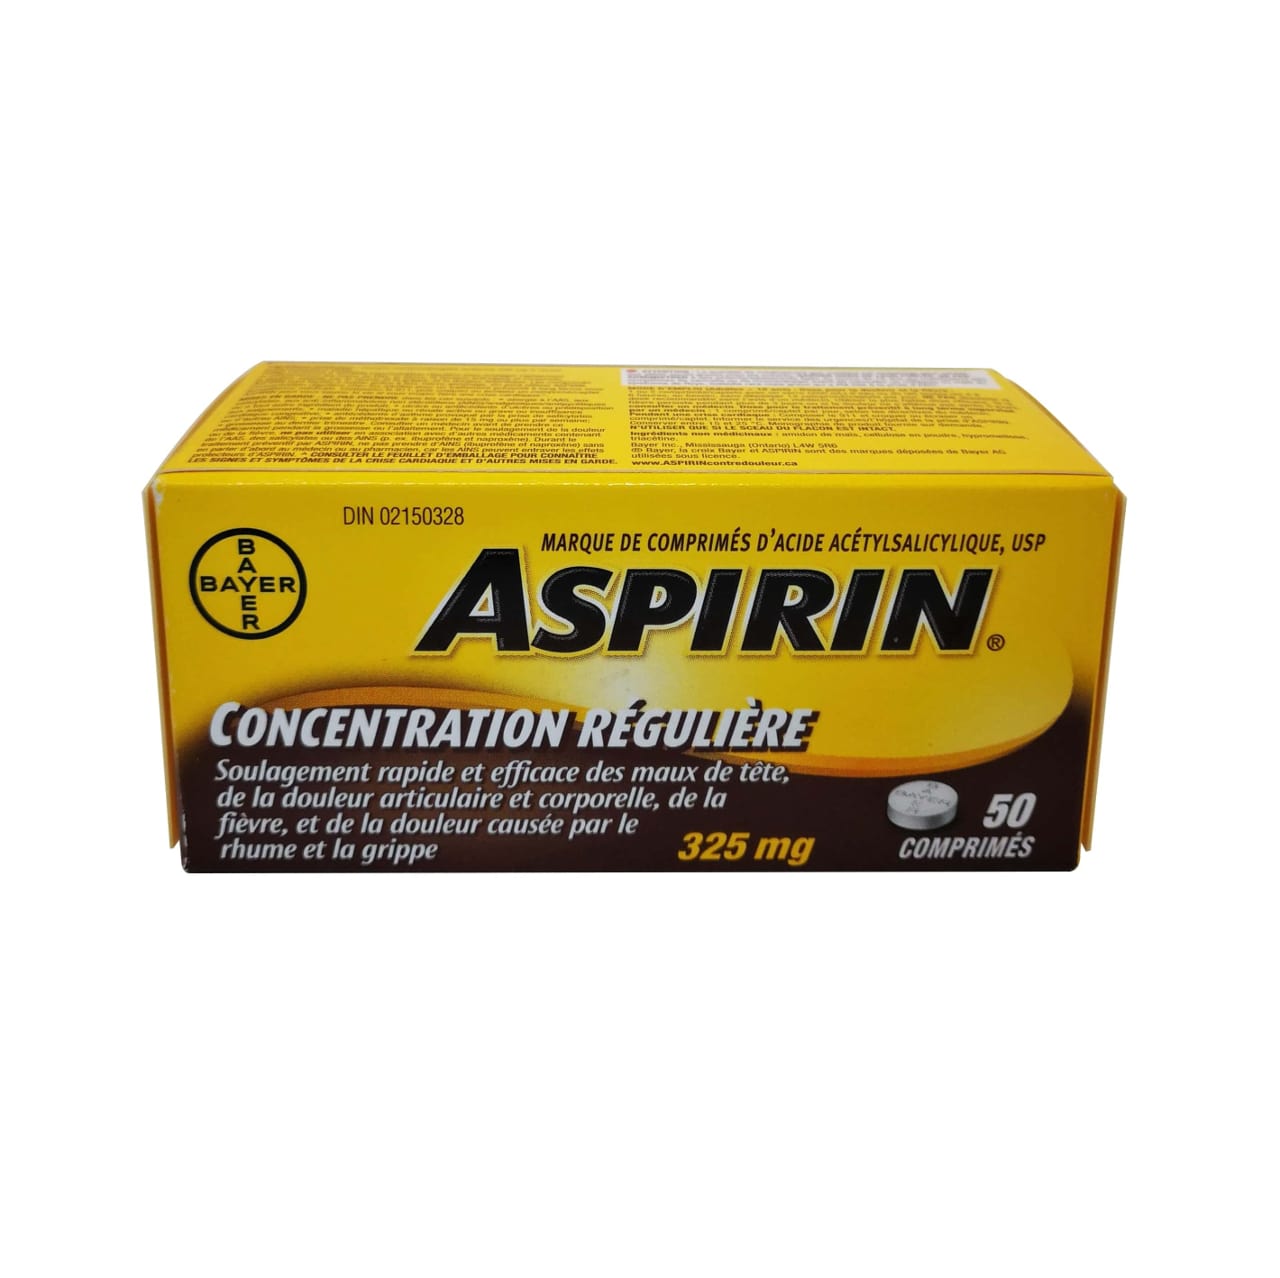 Product package for Aspirin Regular Strength Acetylsalicylic Acid 325mg (Tablets) 50 pack in French